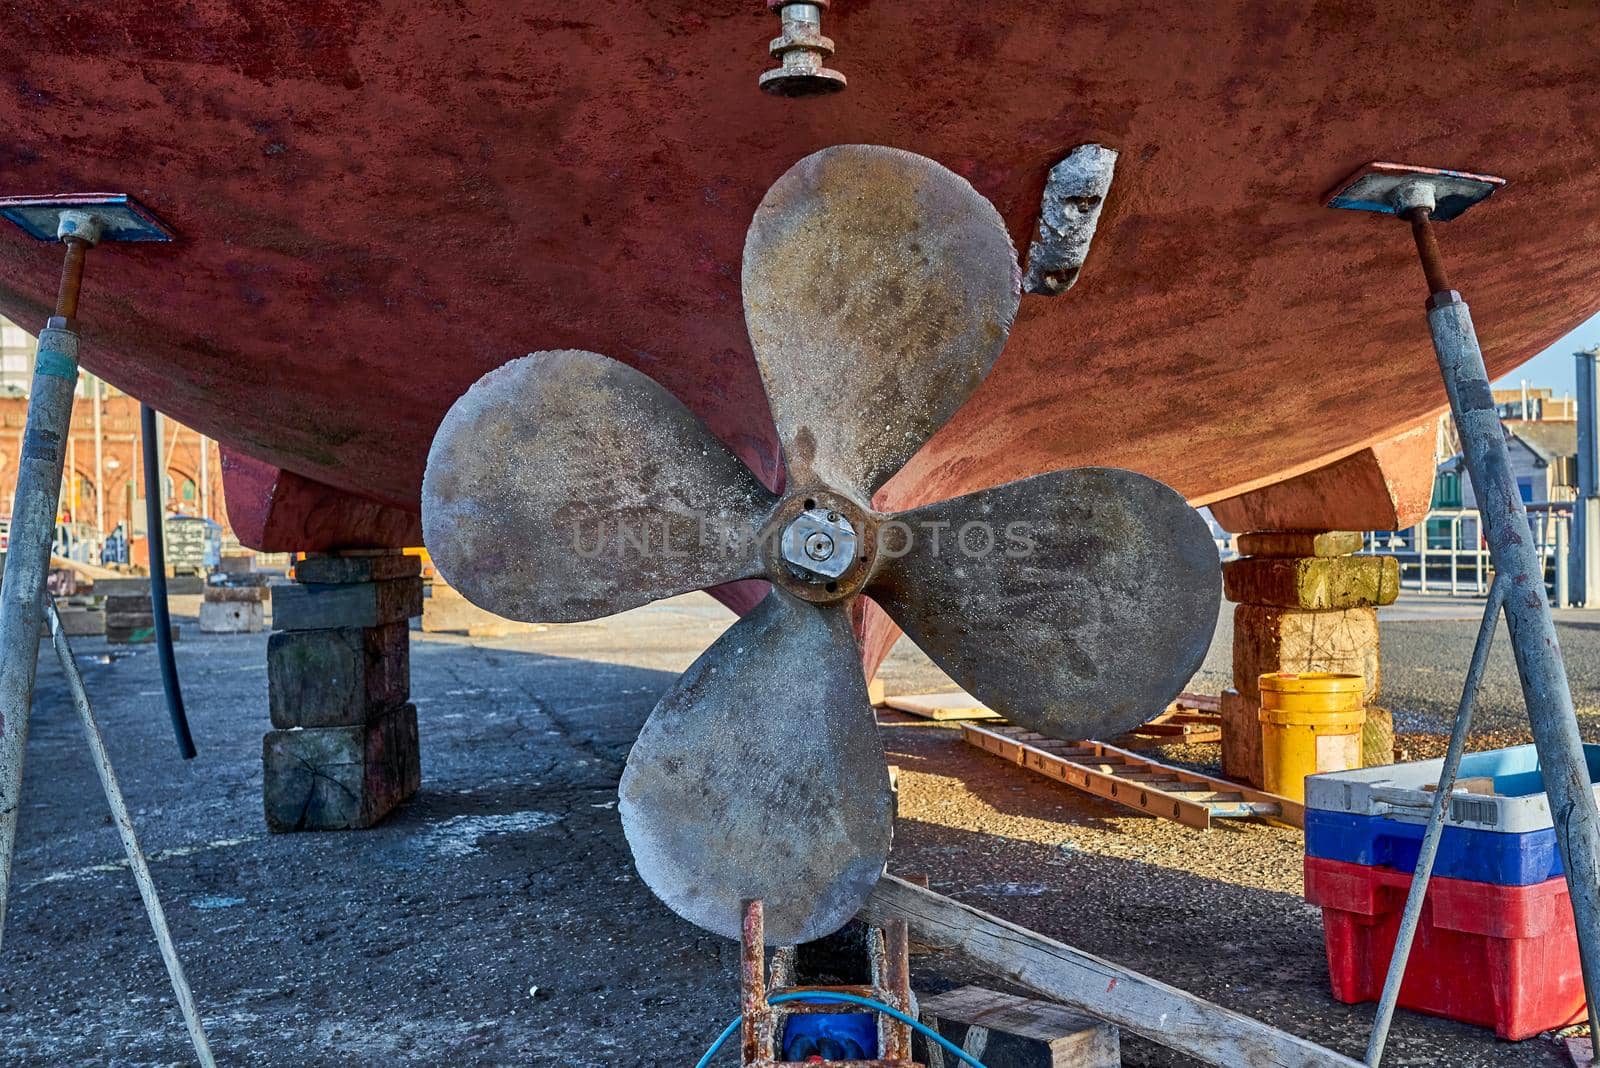 A red ship in dry dock showing the propeller from the back